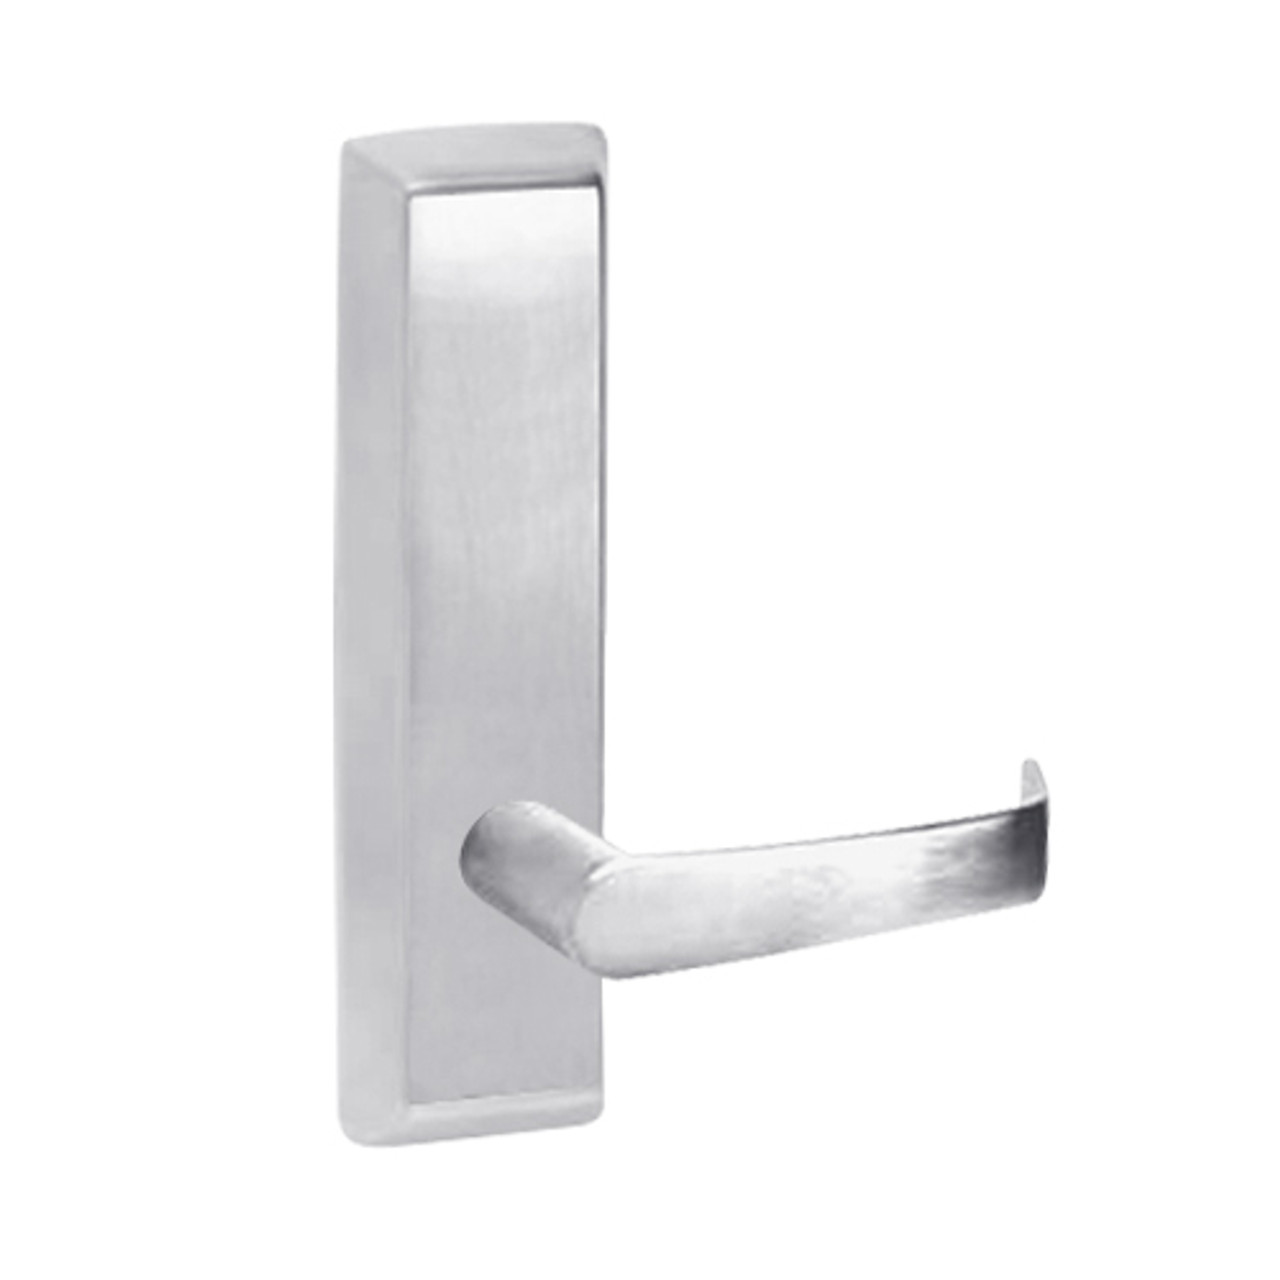 N955-625-RHR Corbin ED5000 Series Exit Device Trim with Classroom Newport Lever in Bright Chrome Finish